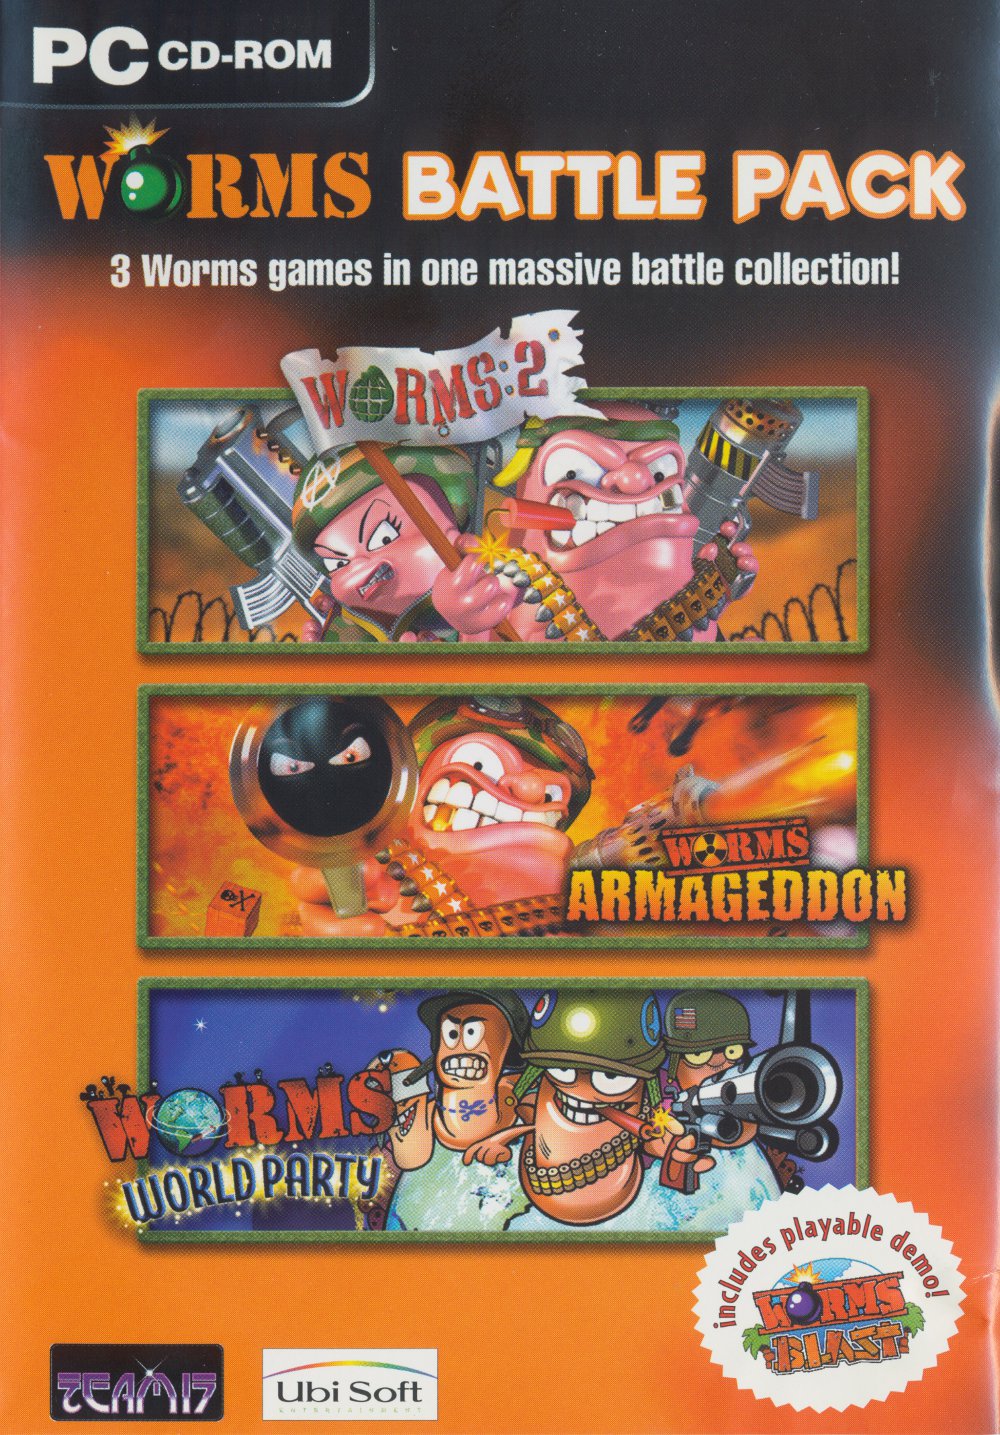 Worms Battle Pack